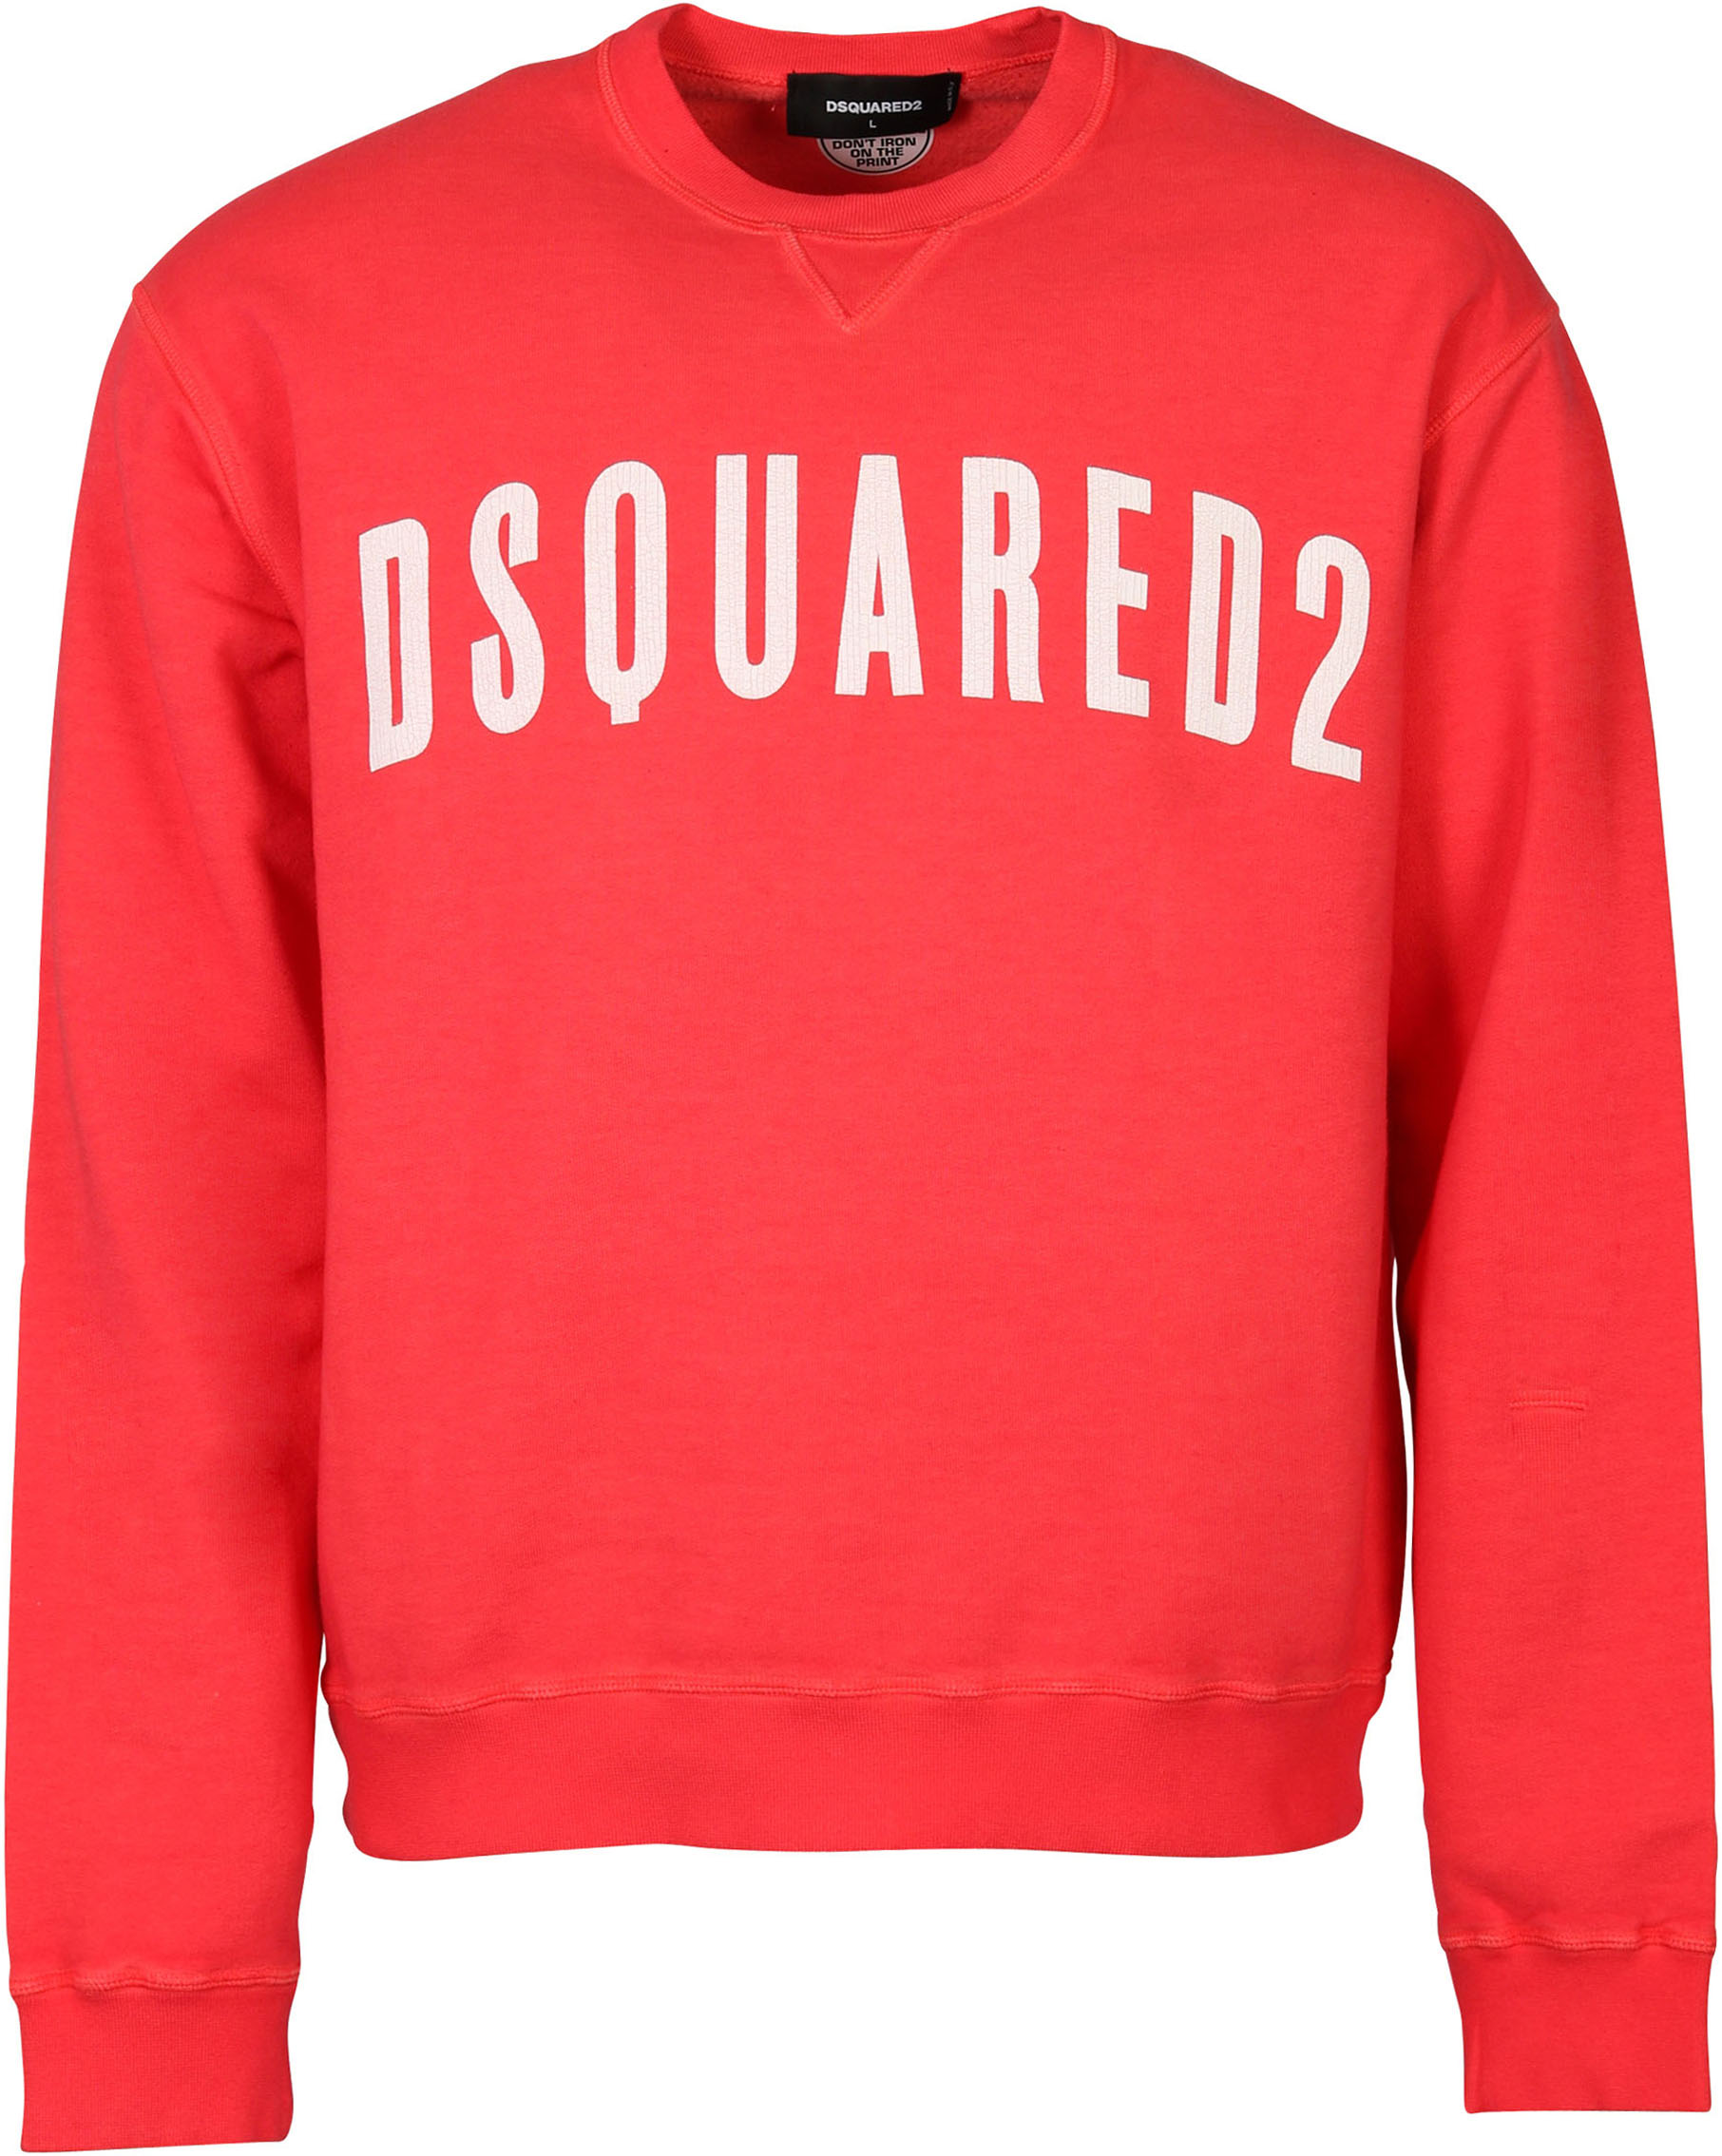 Dsquared Sweatshirt Coral Red Printed S